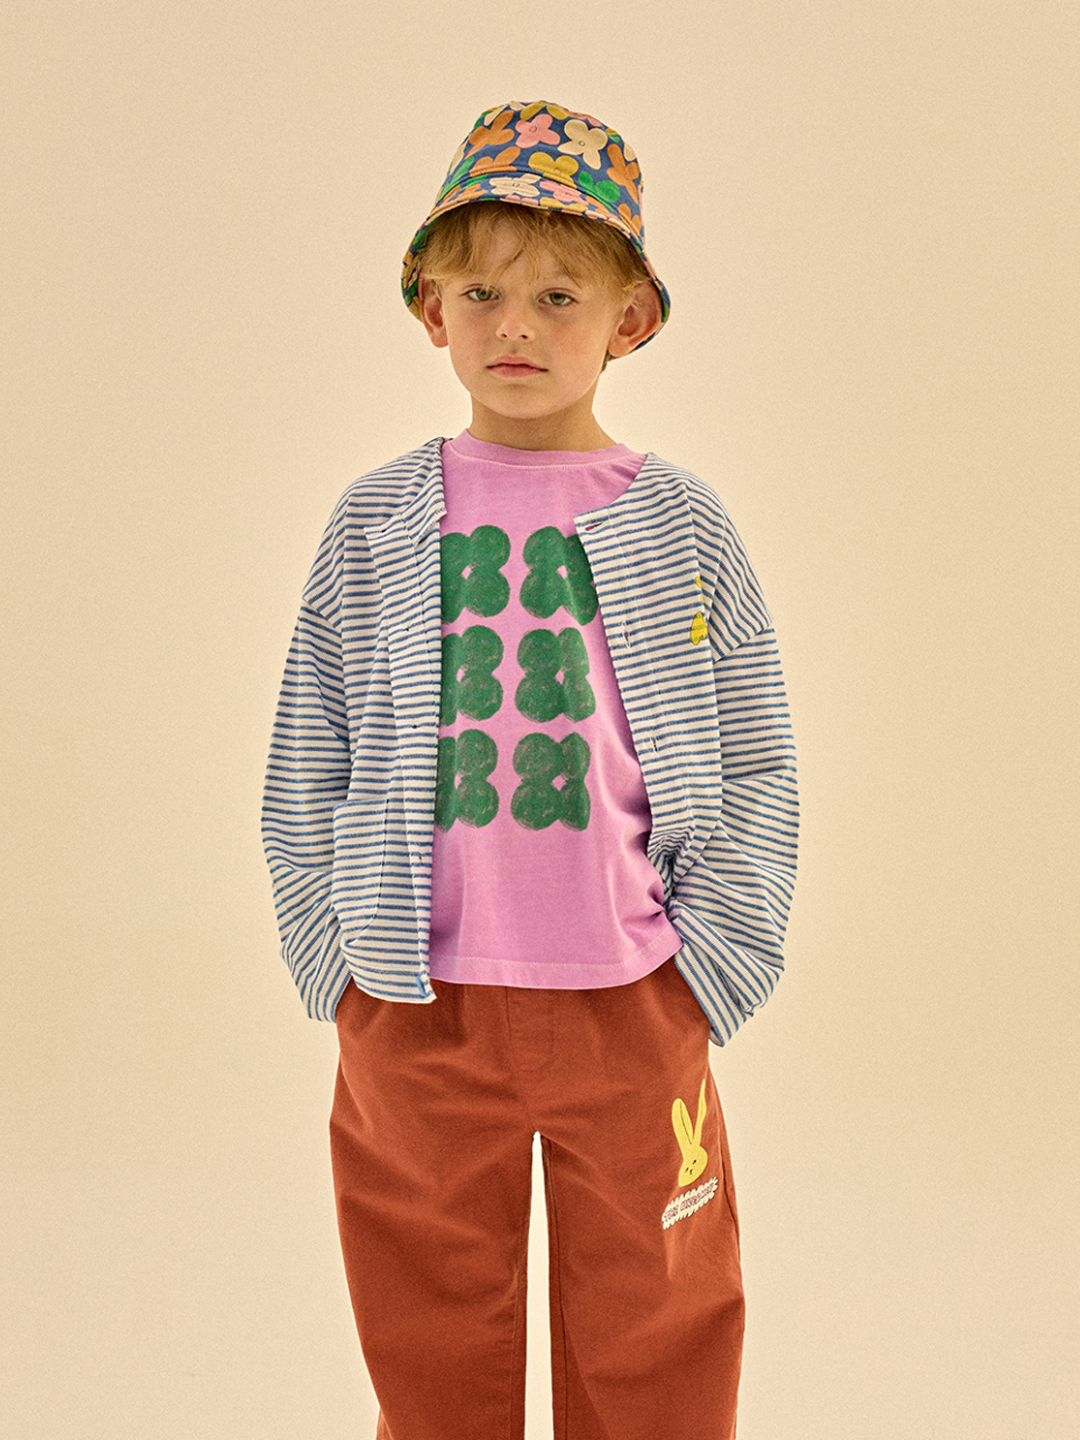 Child wearing Clover Tshirt styled.